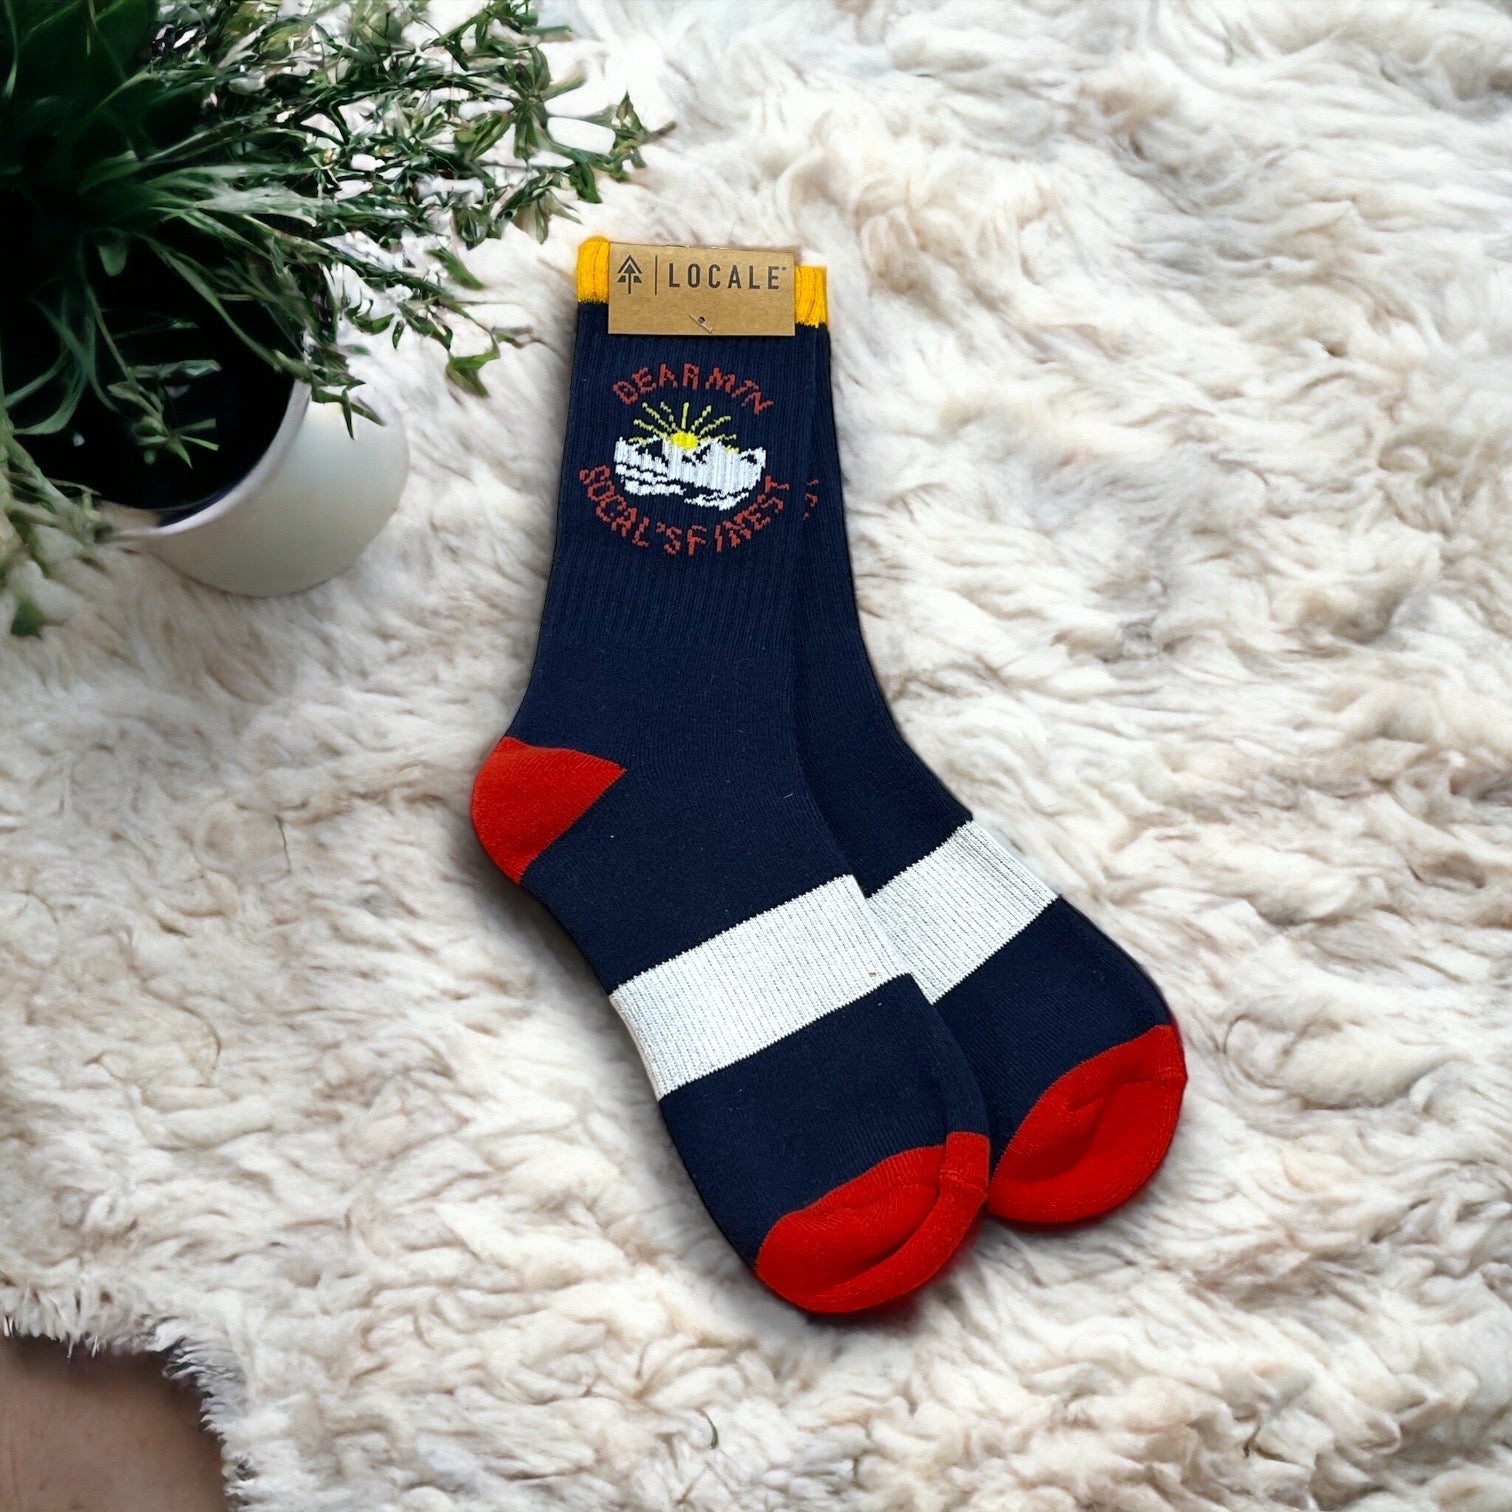 Red, white, & blue Locale Bear Mountain sock with mountain and sun design.